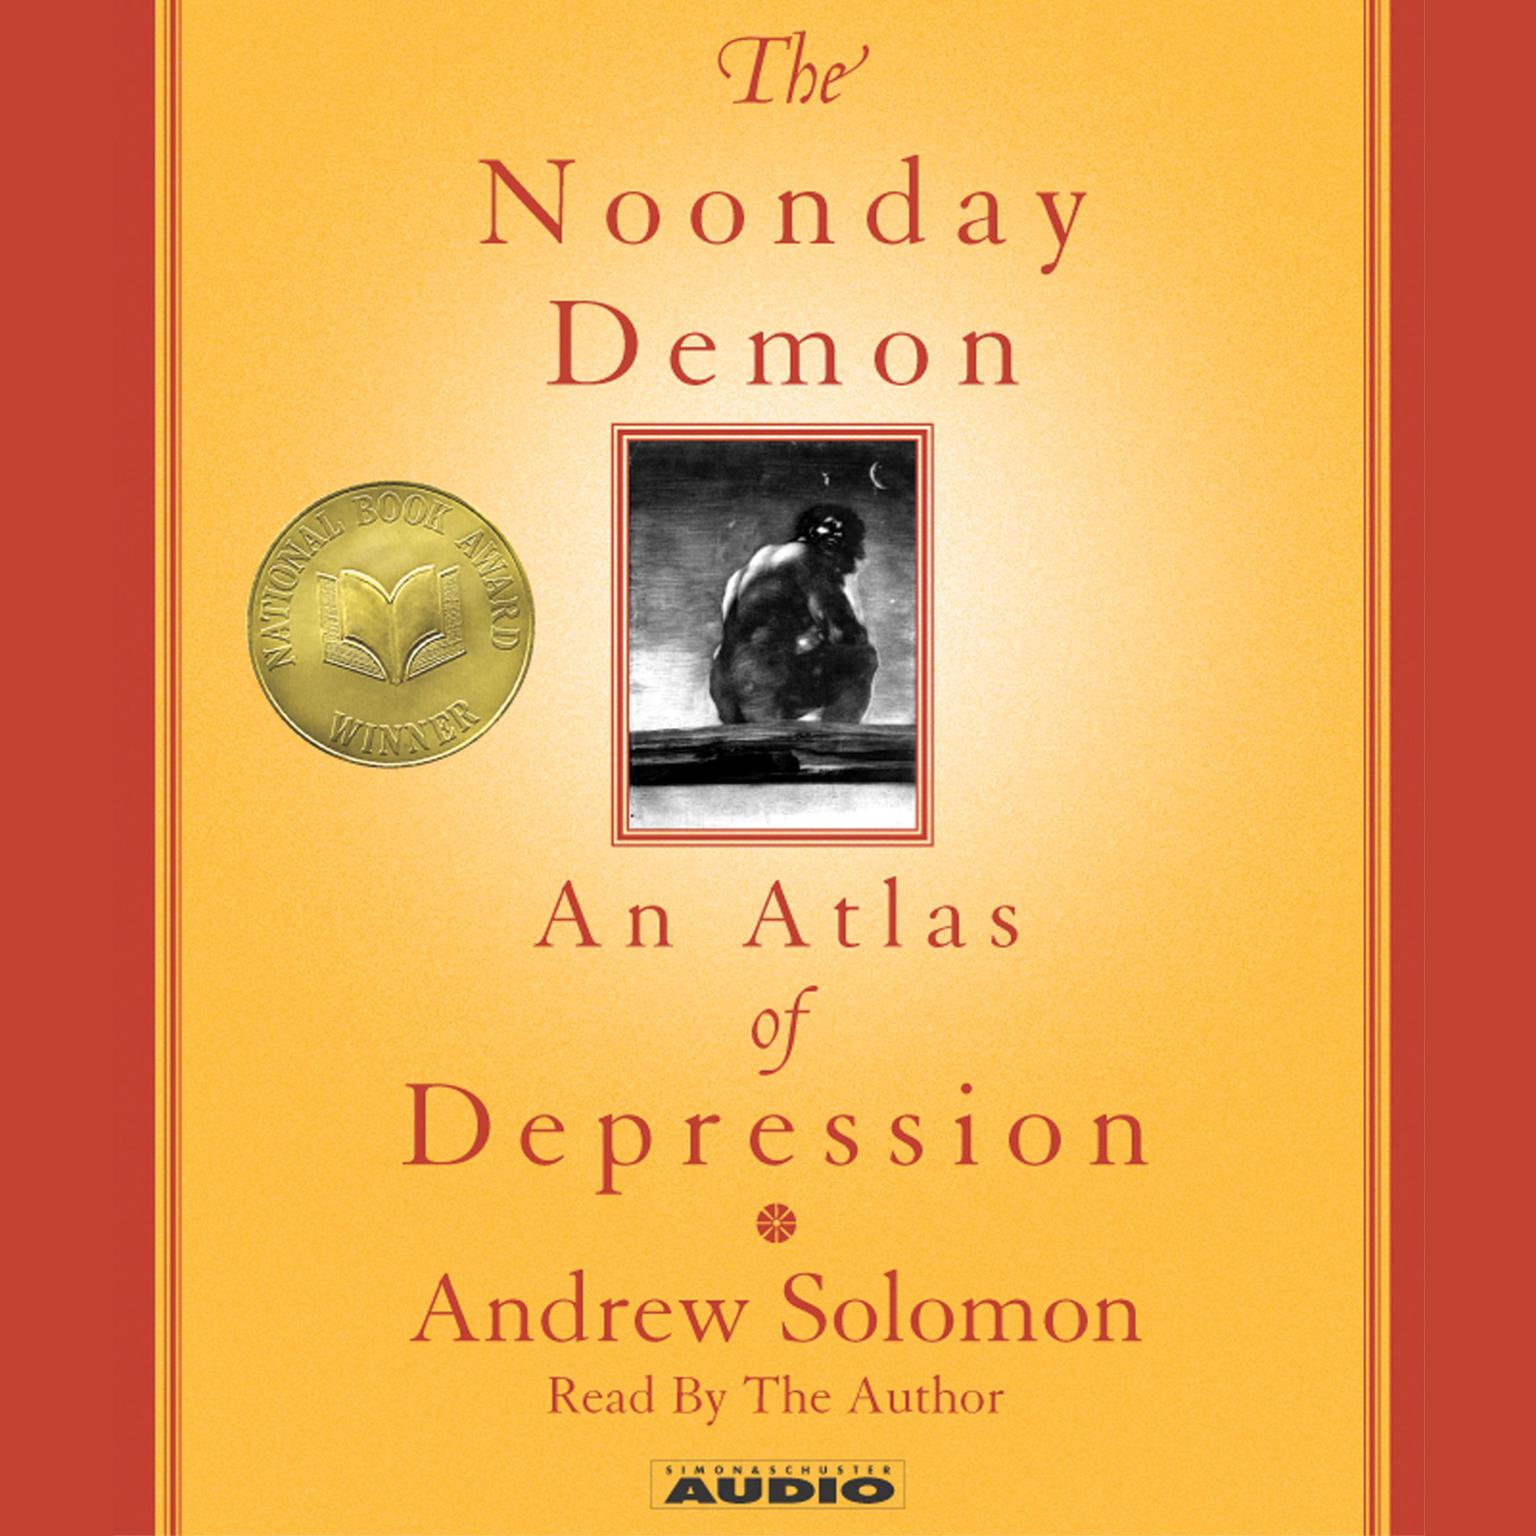 The Noonday Demon (Abridged): An Atlas Of Depression Audiobook, by Andrew Solomon